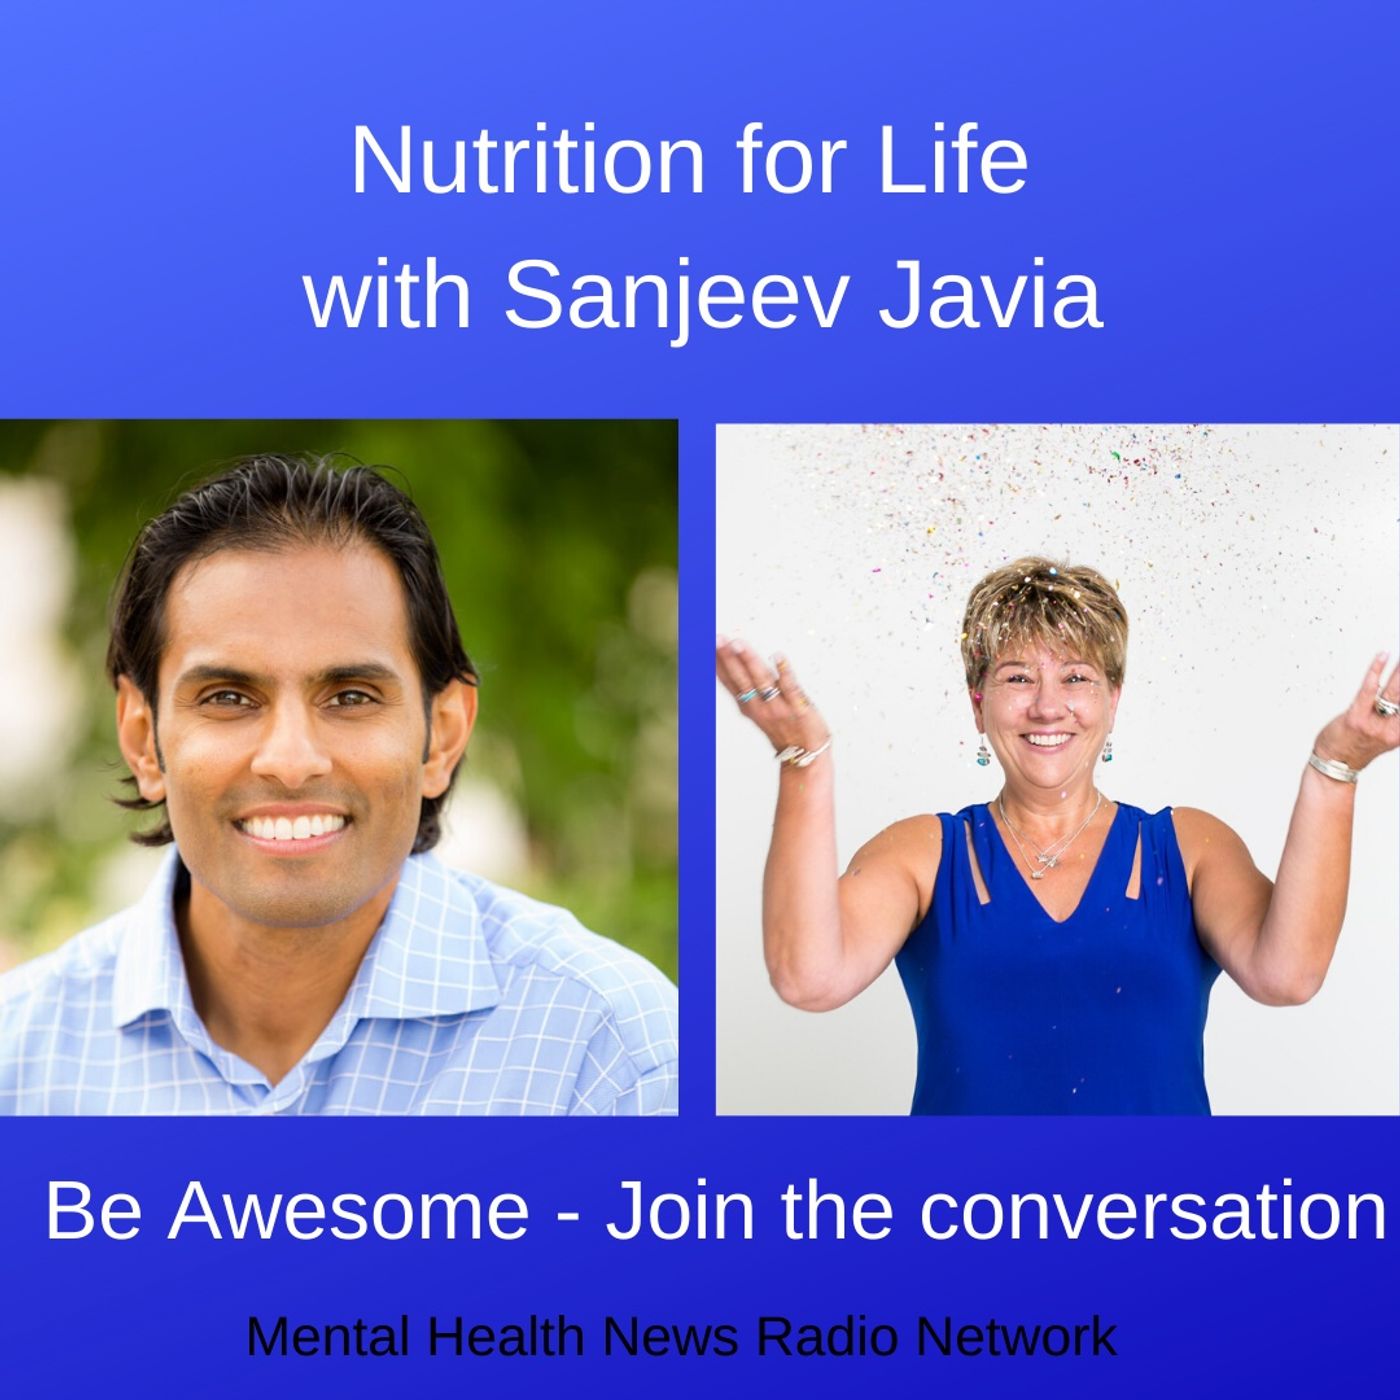 Nutrition for Life with Sanjeev Javia